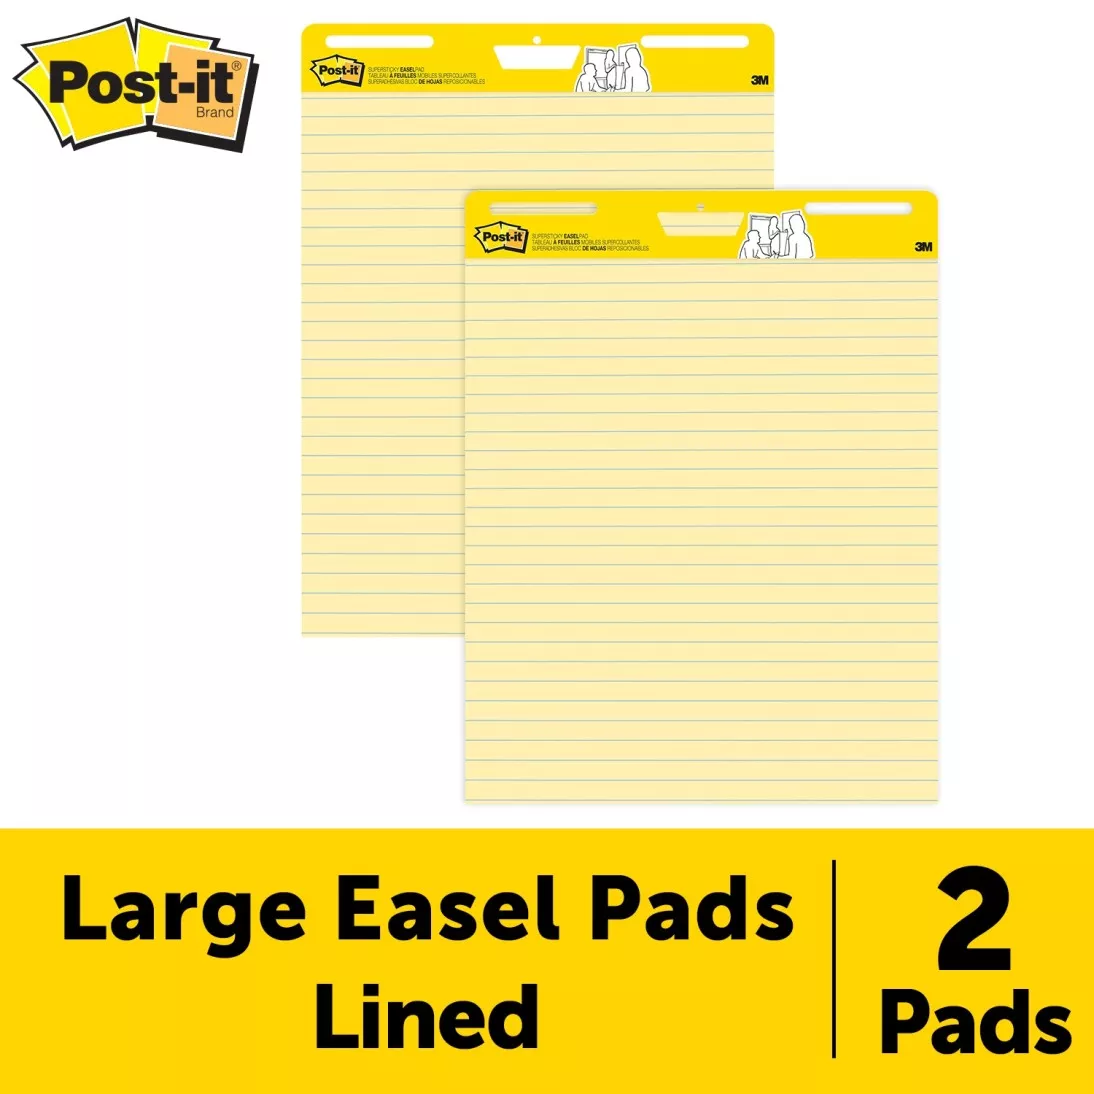 Post-it® Super Sticky Easel Pad 561, 25 in. x 30 in. Sheets, Yellow
Paper with Lines, 30 Sheets/Pad, 2 Pads/Pack